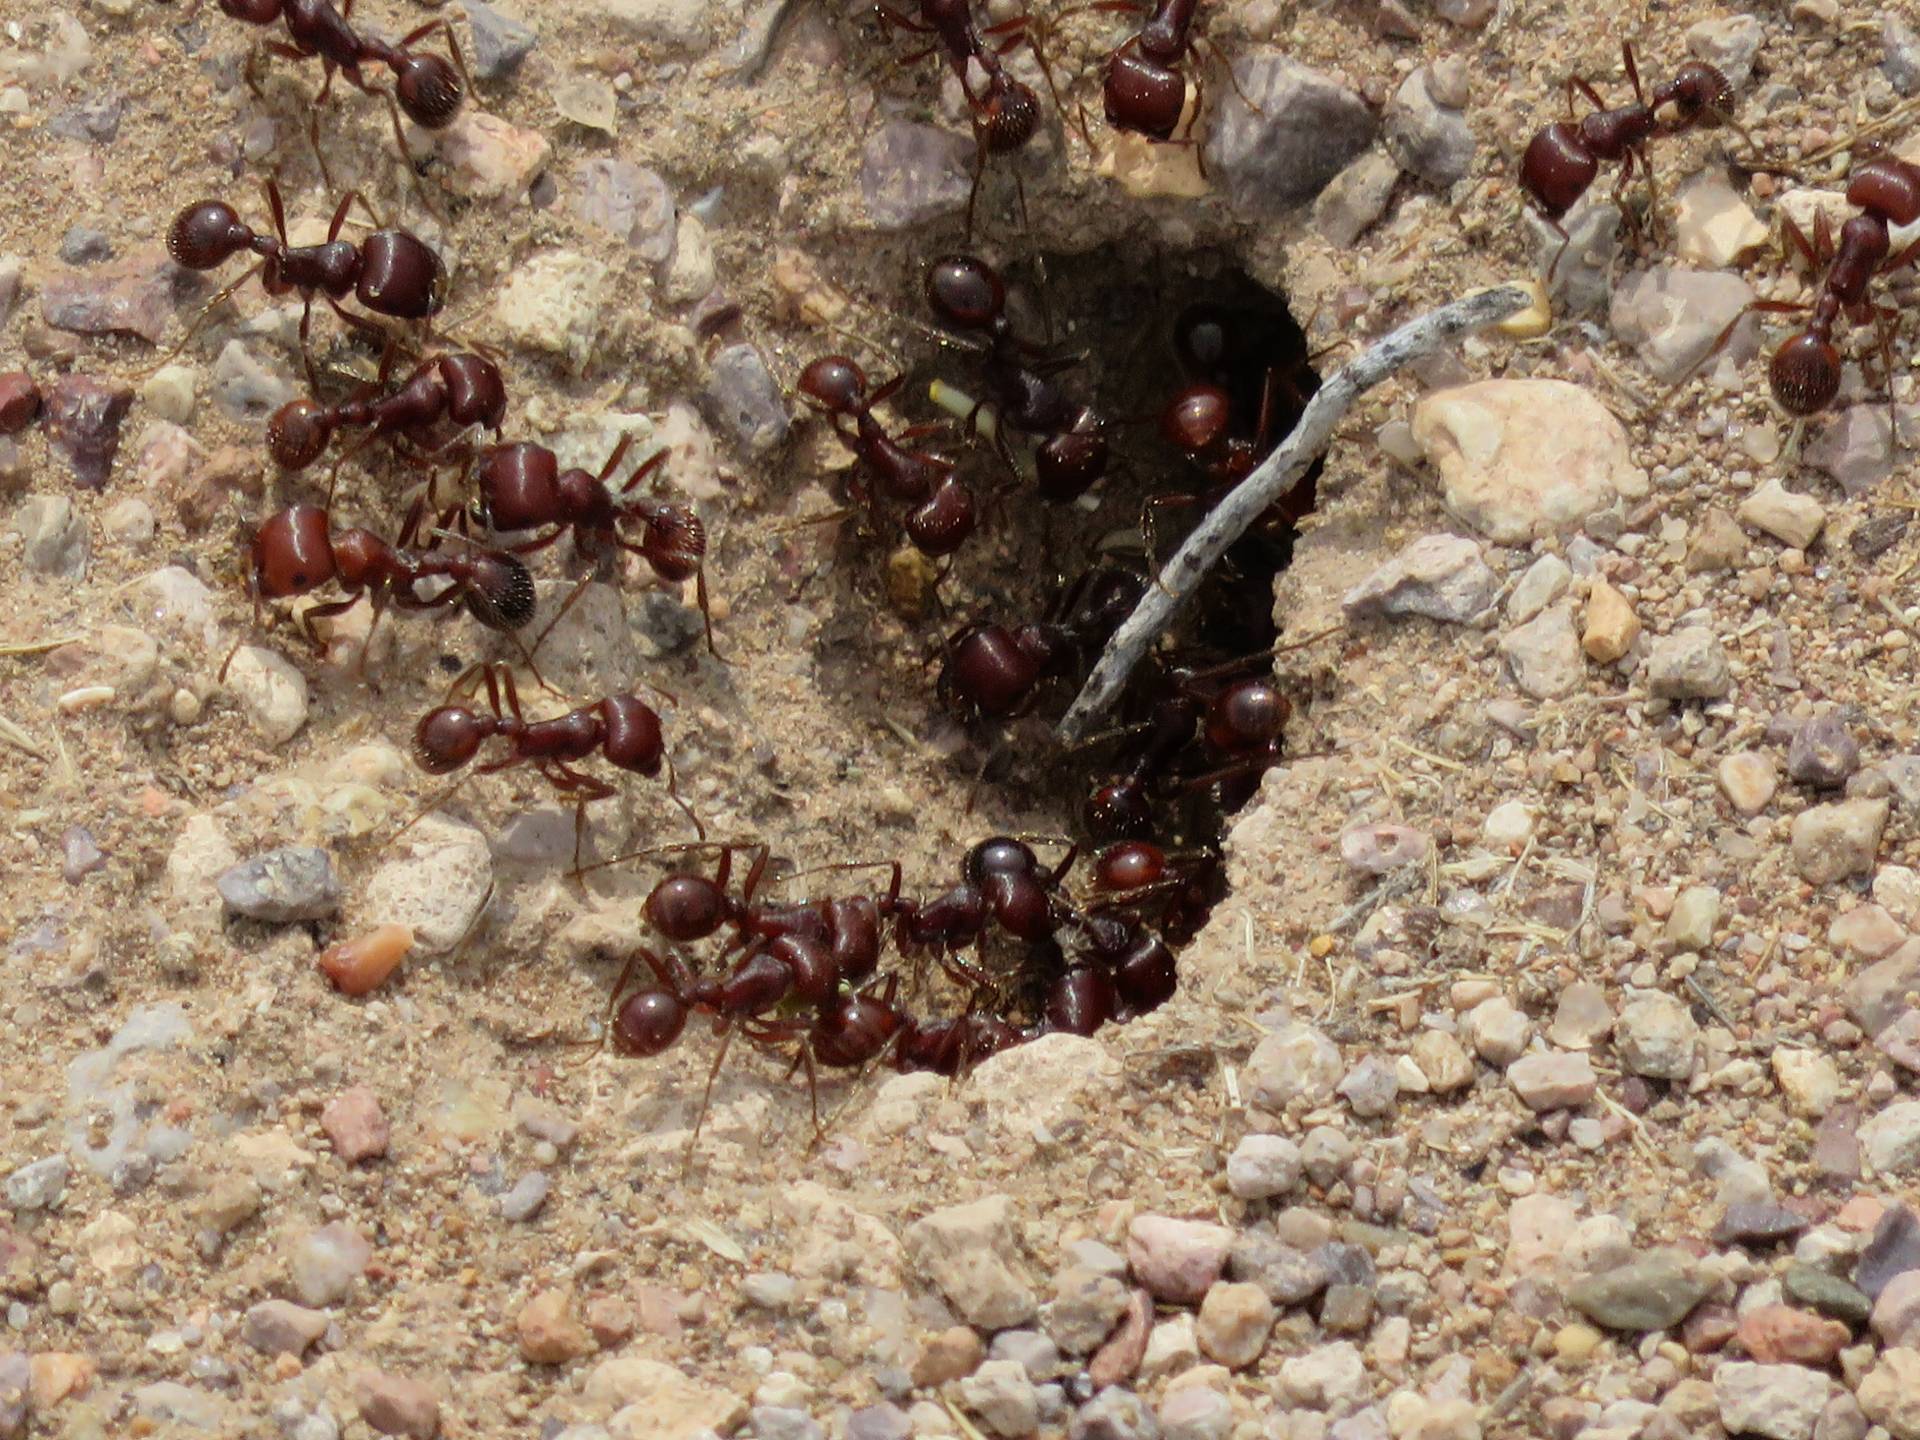 Ants crawling into a hole